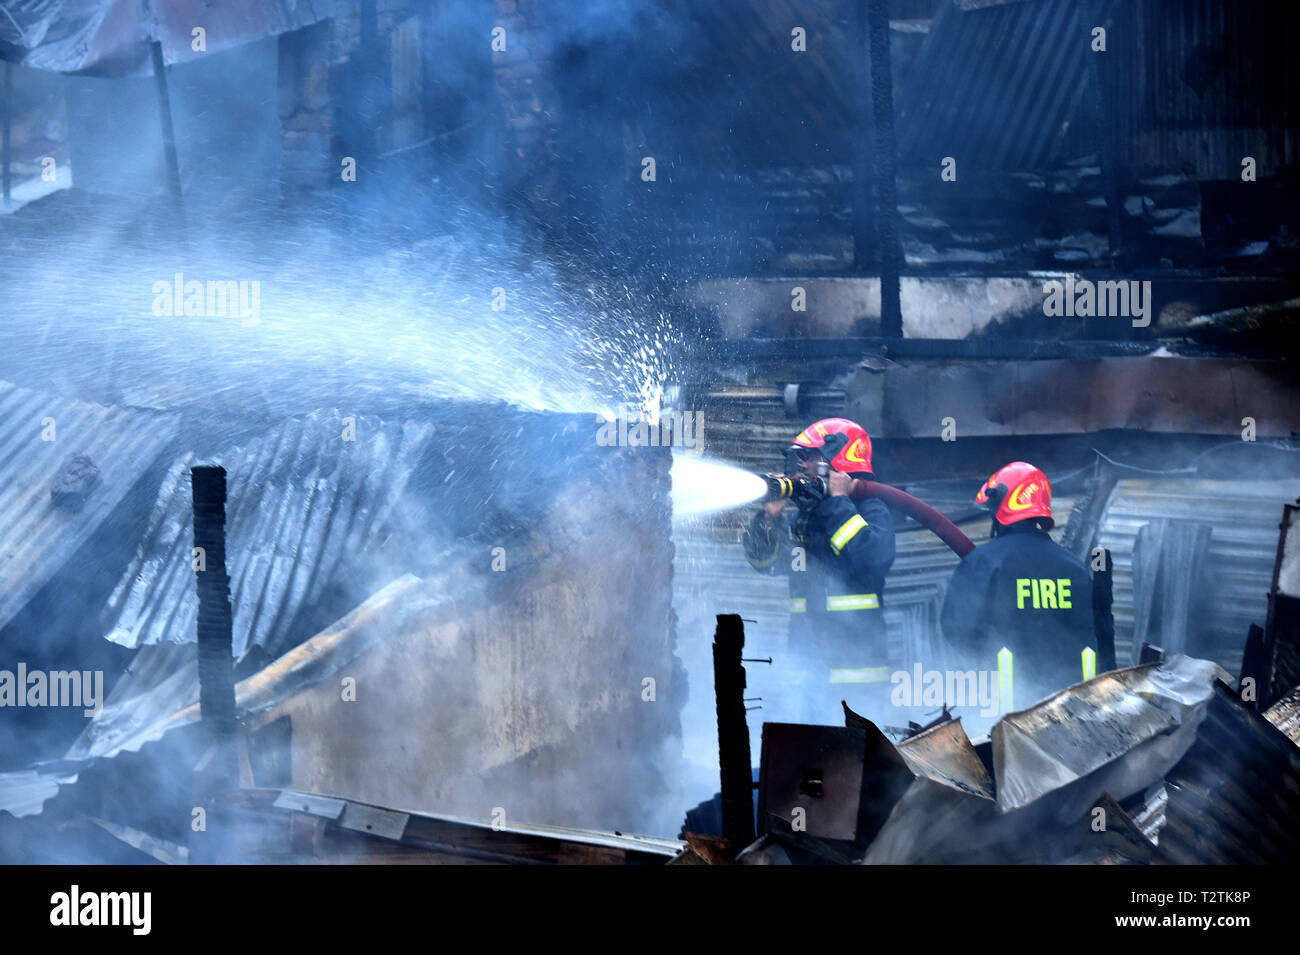 Dhaka, Bangladesh. 4th Apr, 2019. Firefighters spray water to douse flame after a fire broke out at a kitchen market in Dhaka, Bangladesh, April 4, 2019. An early morning fire gutted dozens of shops in a kitchen market in Bangladesh capital Dhaka on Thursday, Kazi Nazmuzzaman, deputy assistant director of Fire Service and Civil Defense, told Xinhua. Credit: Stringer/Xinhua/Alamy Live News Stock Photo